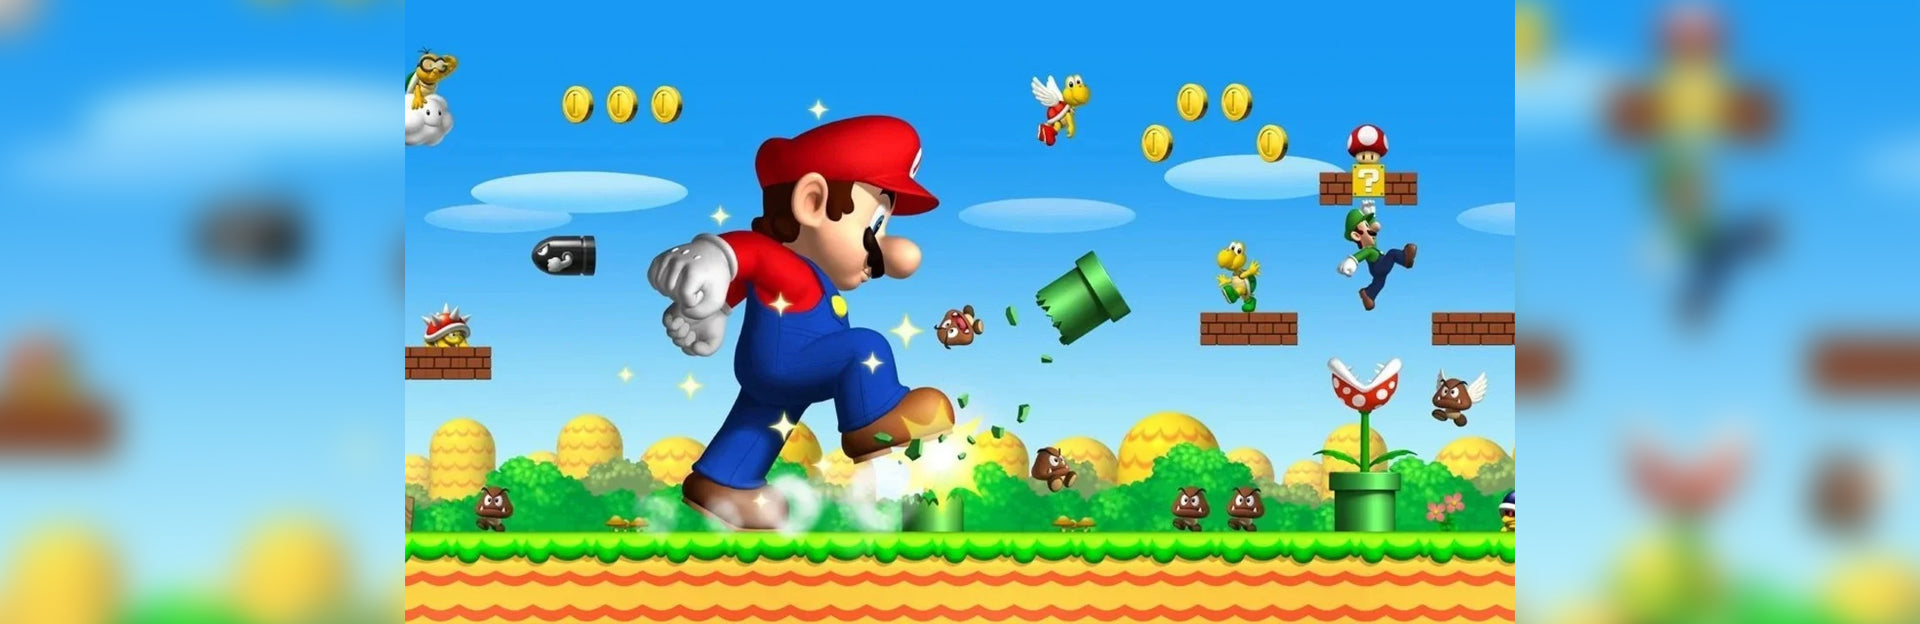 Super Mario Game Online How Many Super Mario Games Are There? (2023 Updated)